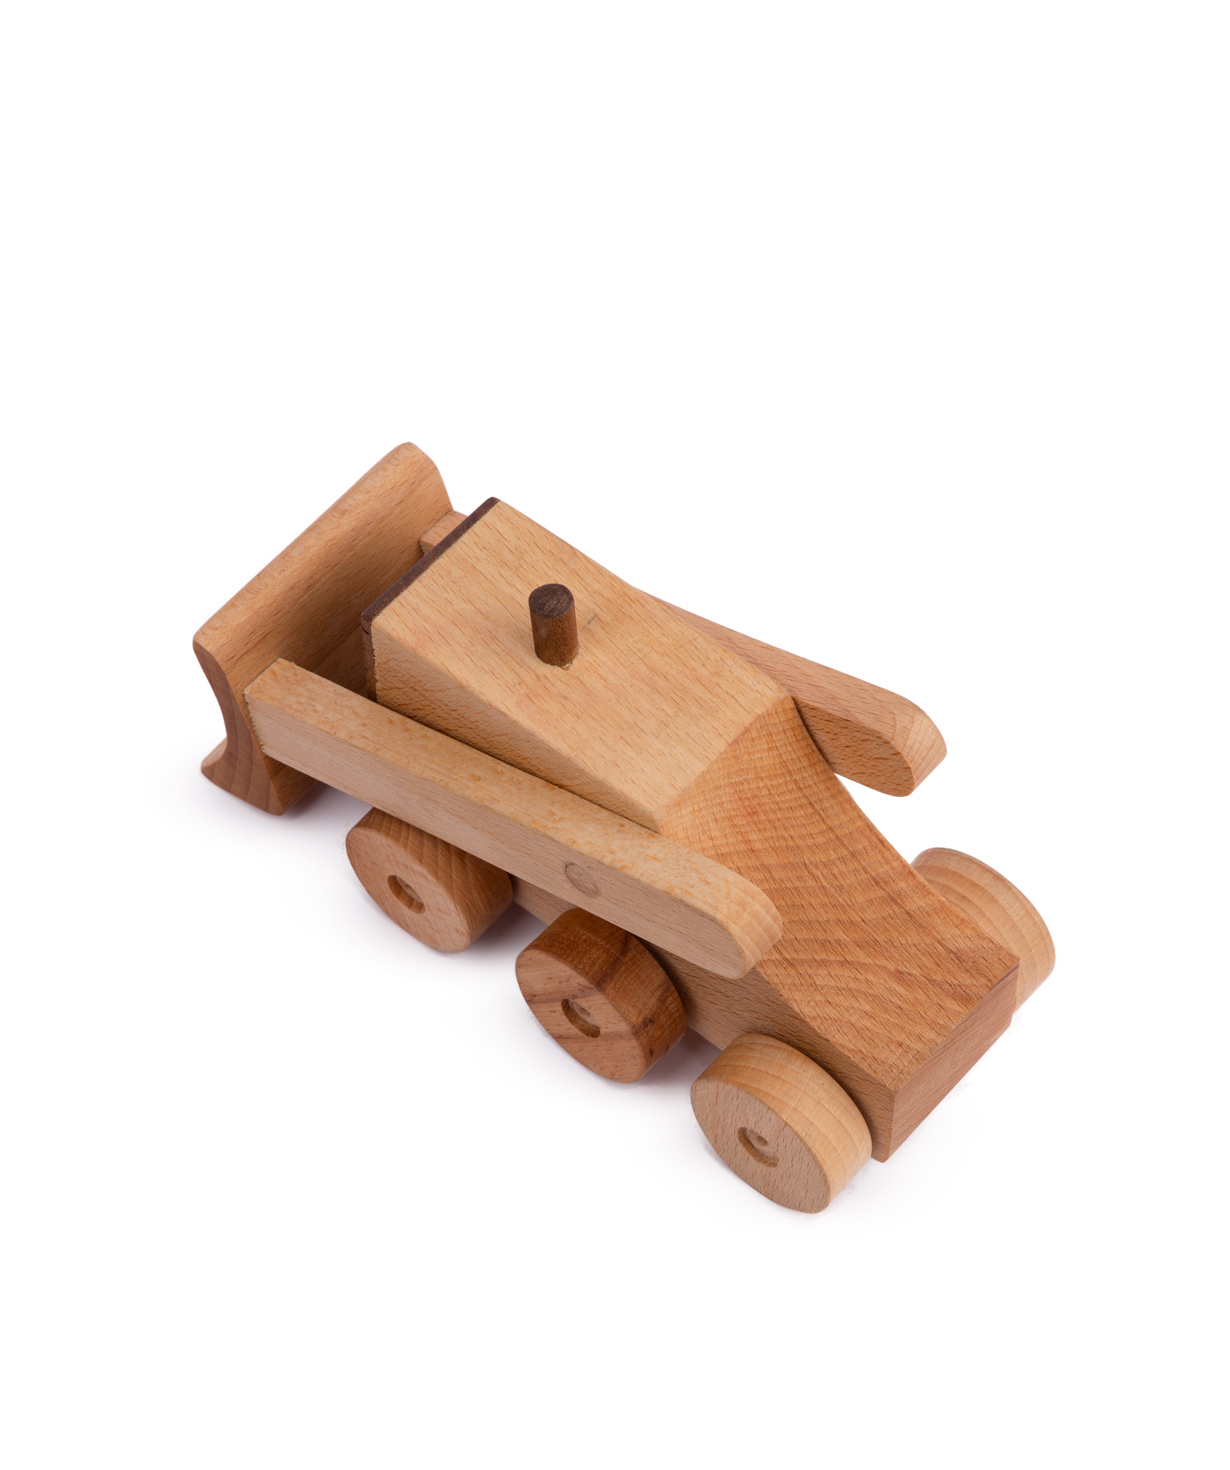 Tractor ''I'm wooden toys'' wooden